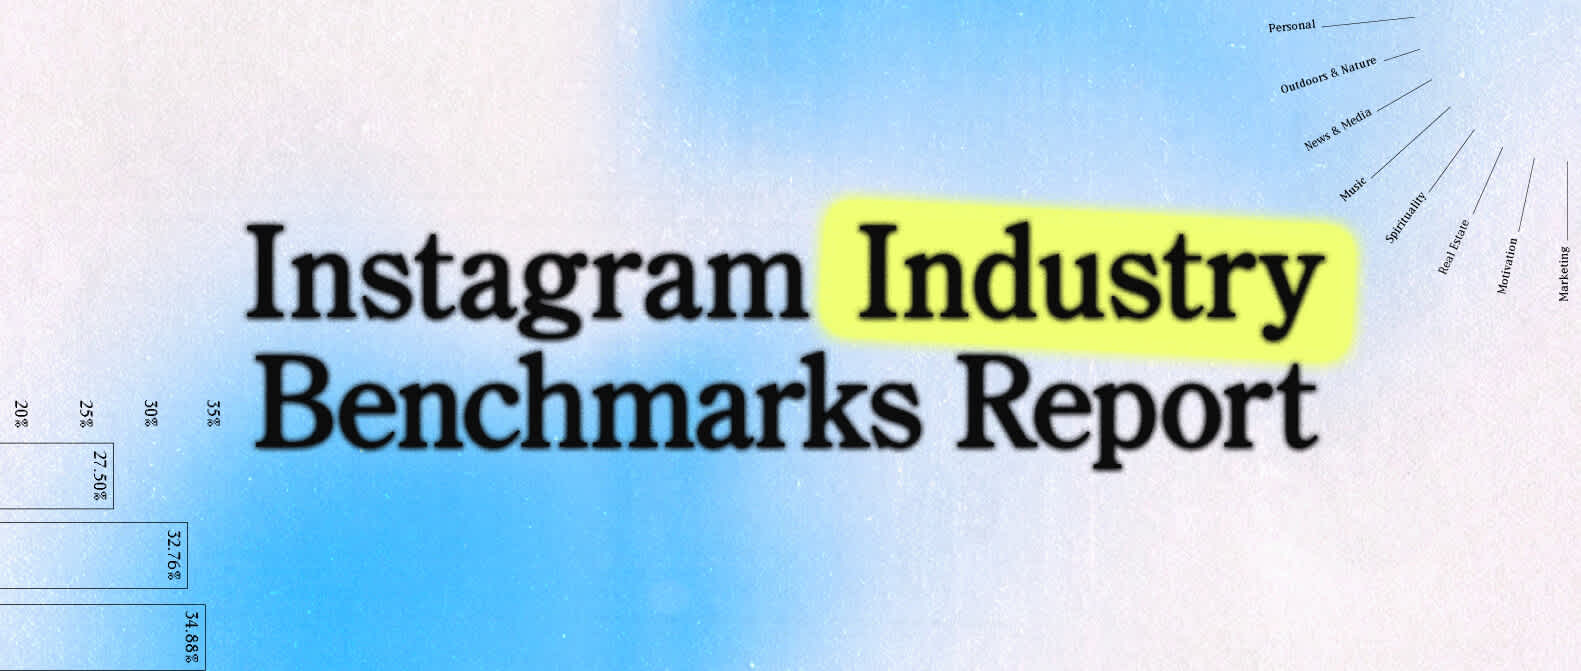 Header image with Instagram Industry Benchmarks Report on blue background